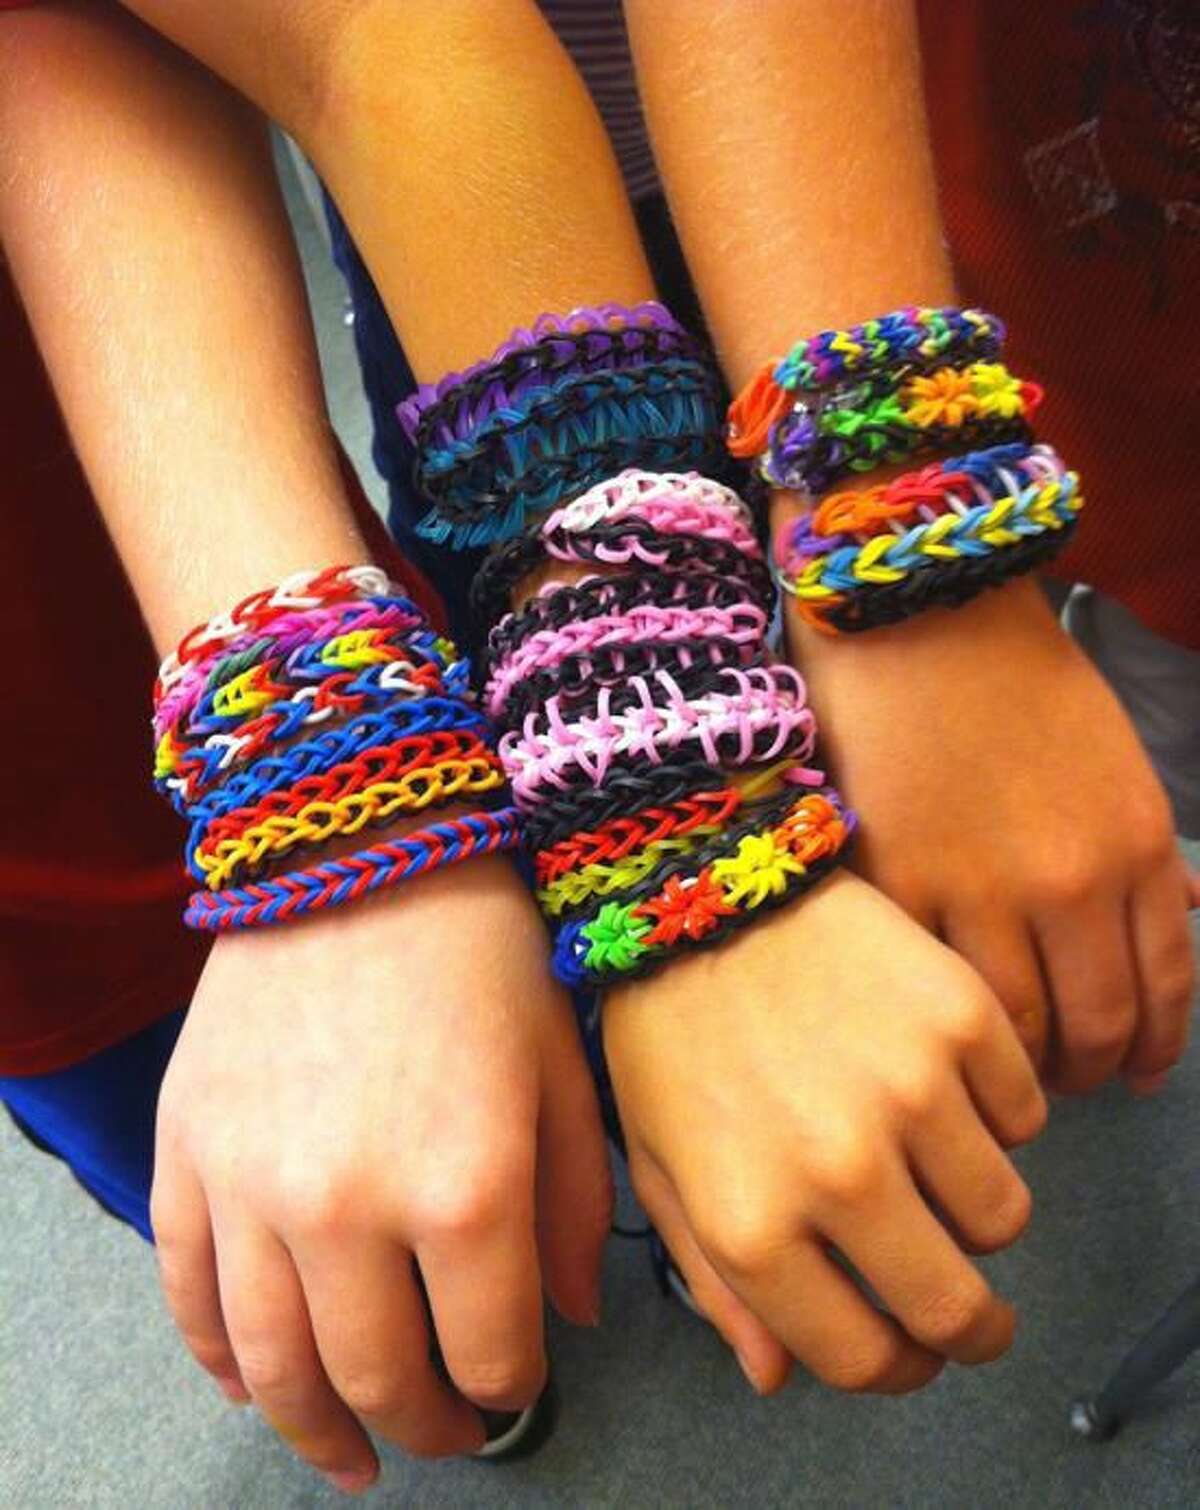 It's like a rainbow - Rubber band bracelets for young set come in